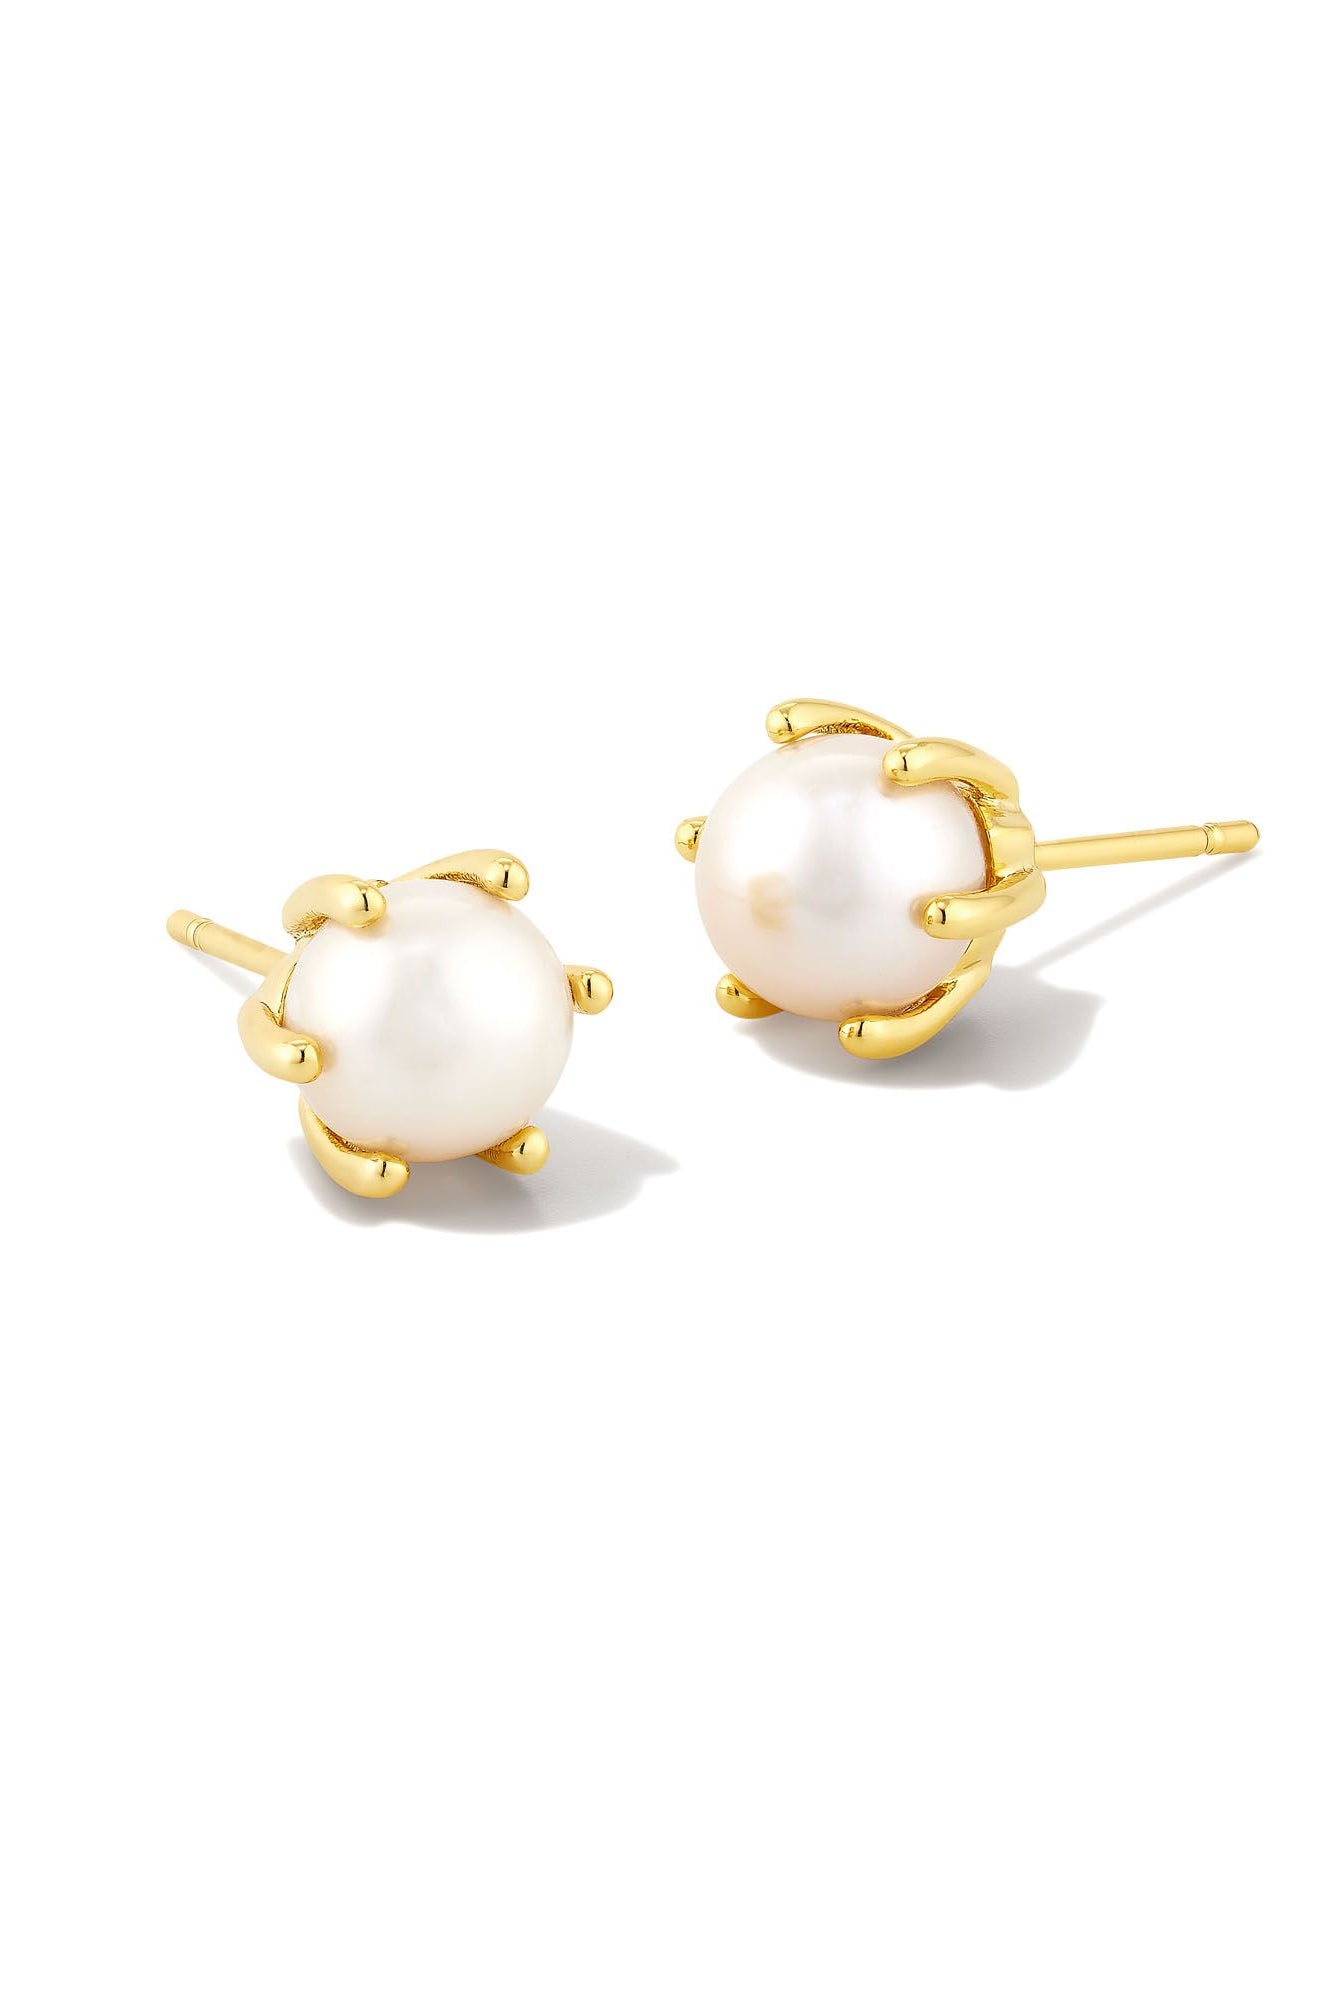 Ashton Pearl Stud Earrings-Earrings-Vixen Collection, Day Spa and Women's Boutique Located in Seattle, Washington